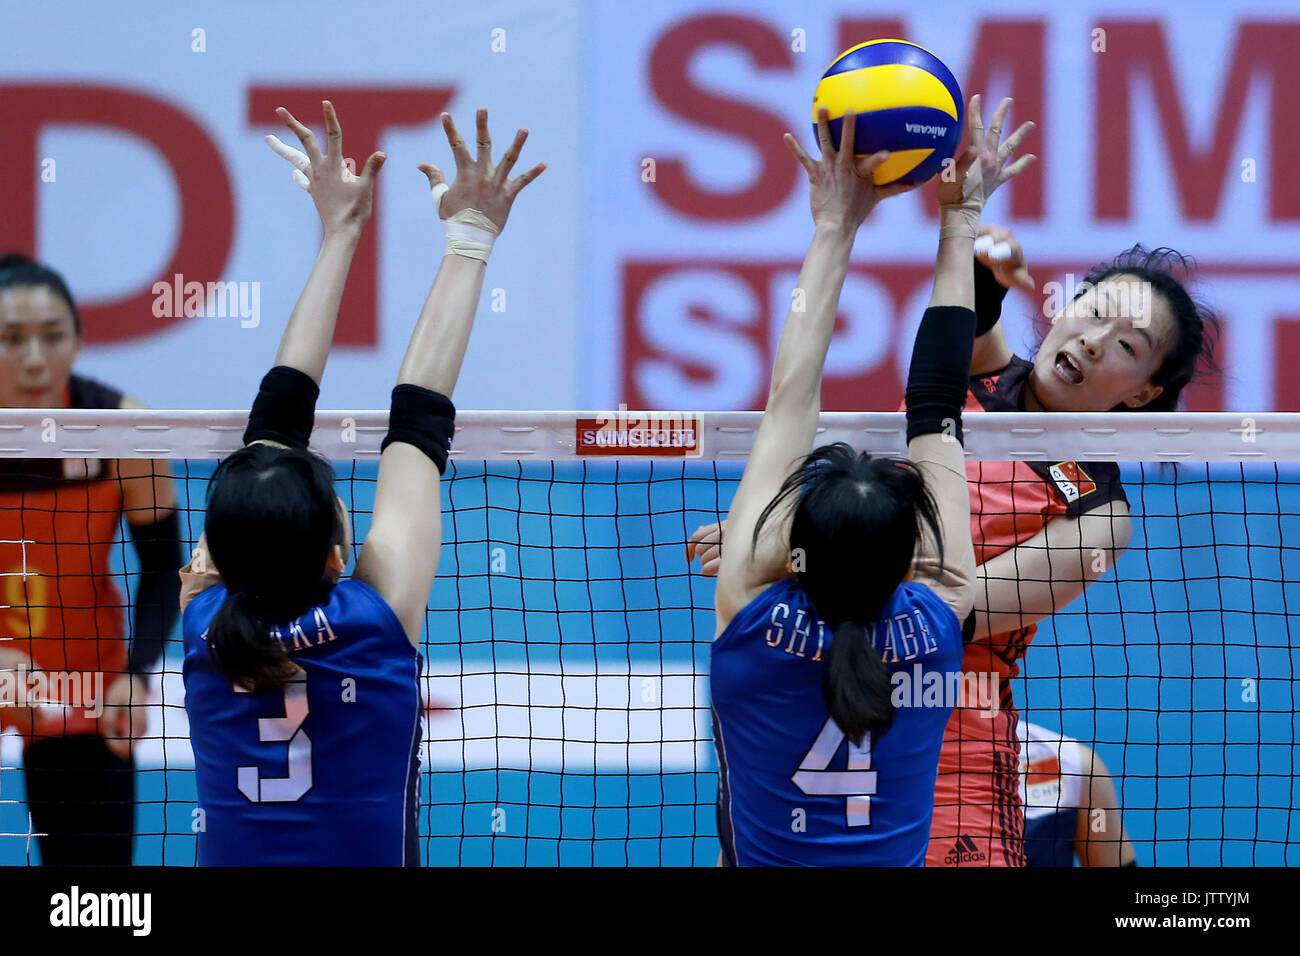 Laguna Province, Philippines. 10th Aug, 2017. Cai Xiao Qing of China (R) competes against Nana Iwasaka (L) and Risa Shinnabe of Japan during their preliminary round match in the 2017 Asian Women's Volleyball Championship in Laguna Province, the Philippines, Aug. 10, 2017. Japan won 3-0. Credit: Rouelle Umali/Xinhua/Alamy Live News Stock Photo